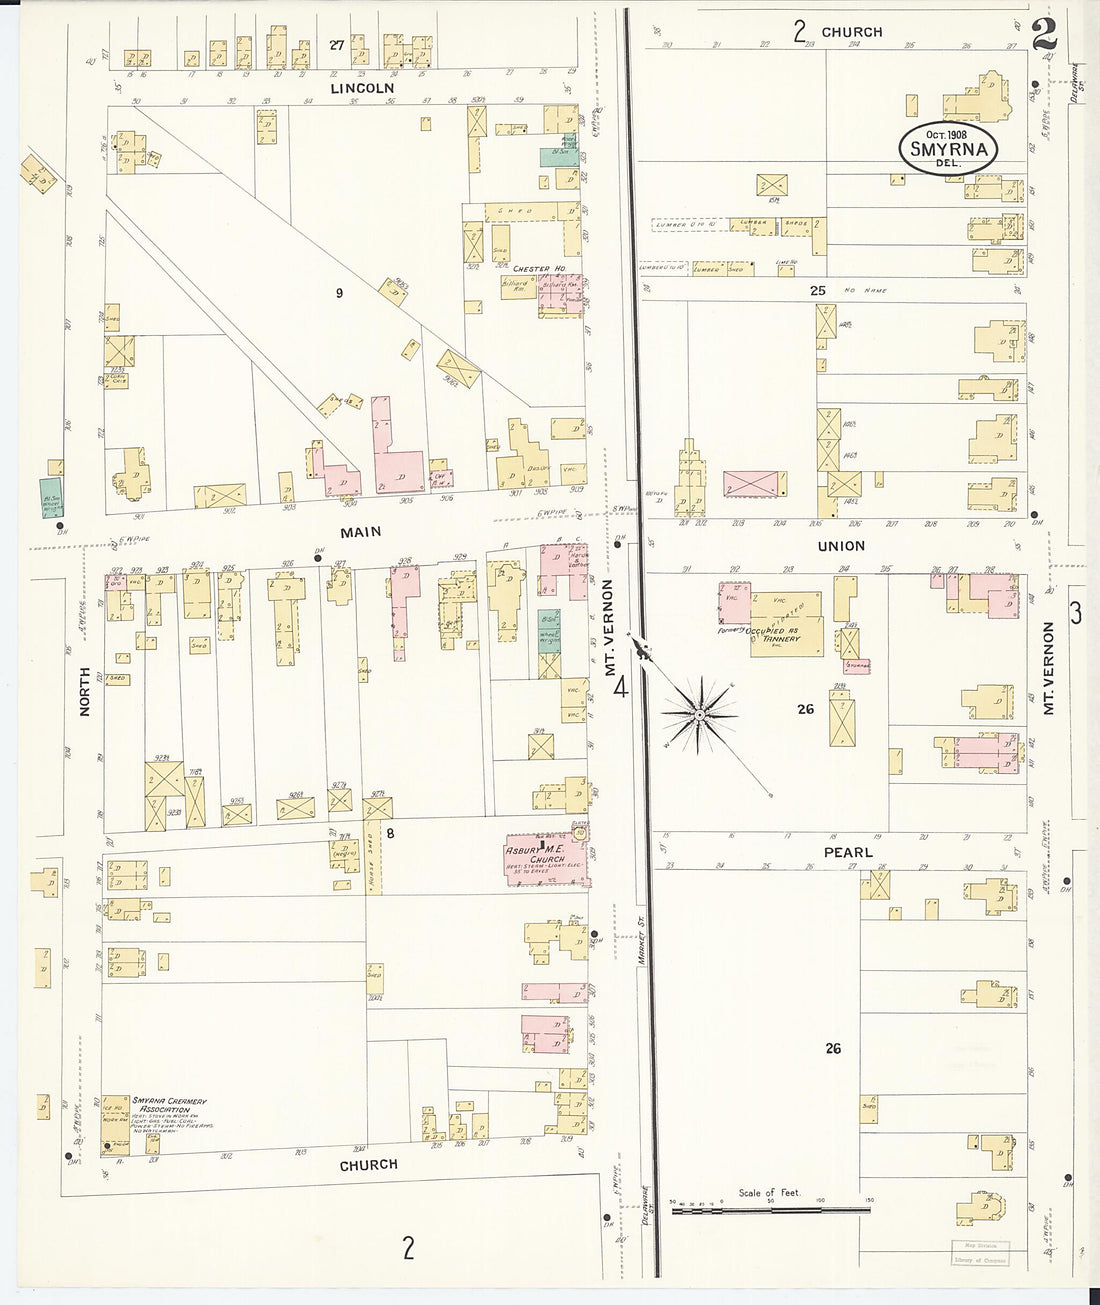 This old map of Smyrna, Kent County, Delaware was created by Sanborn Map Company in 1908